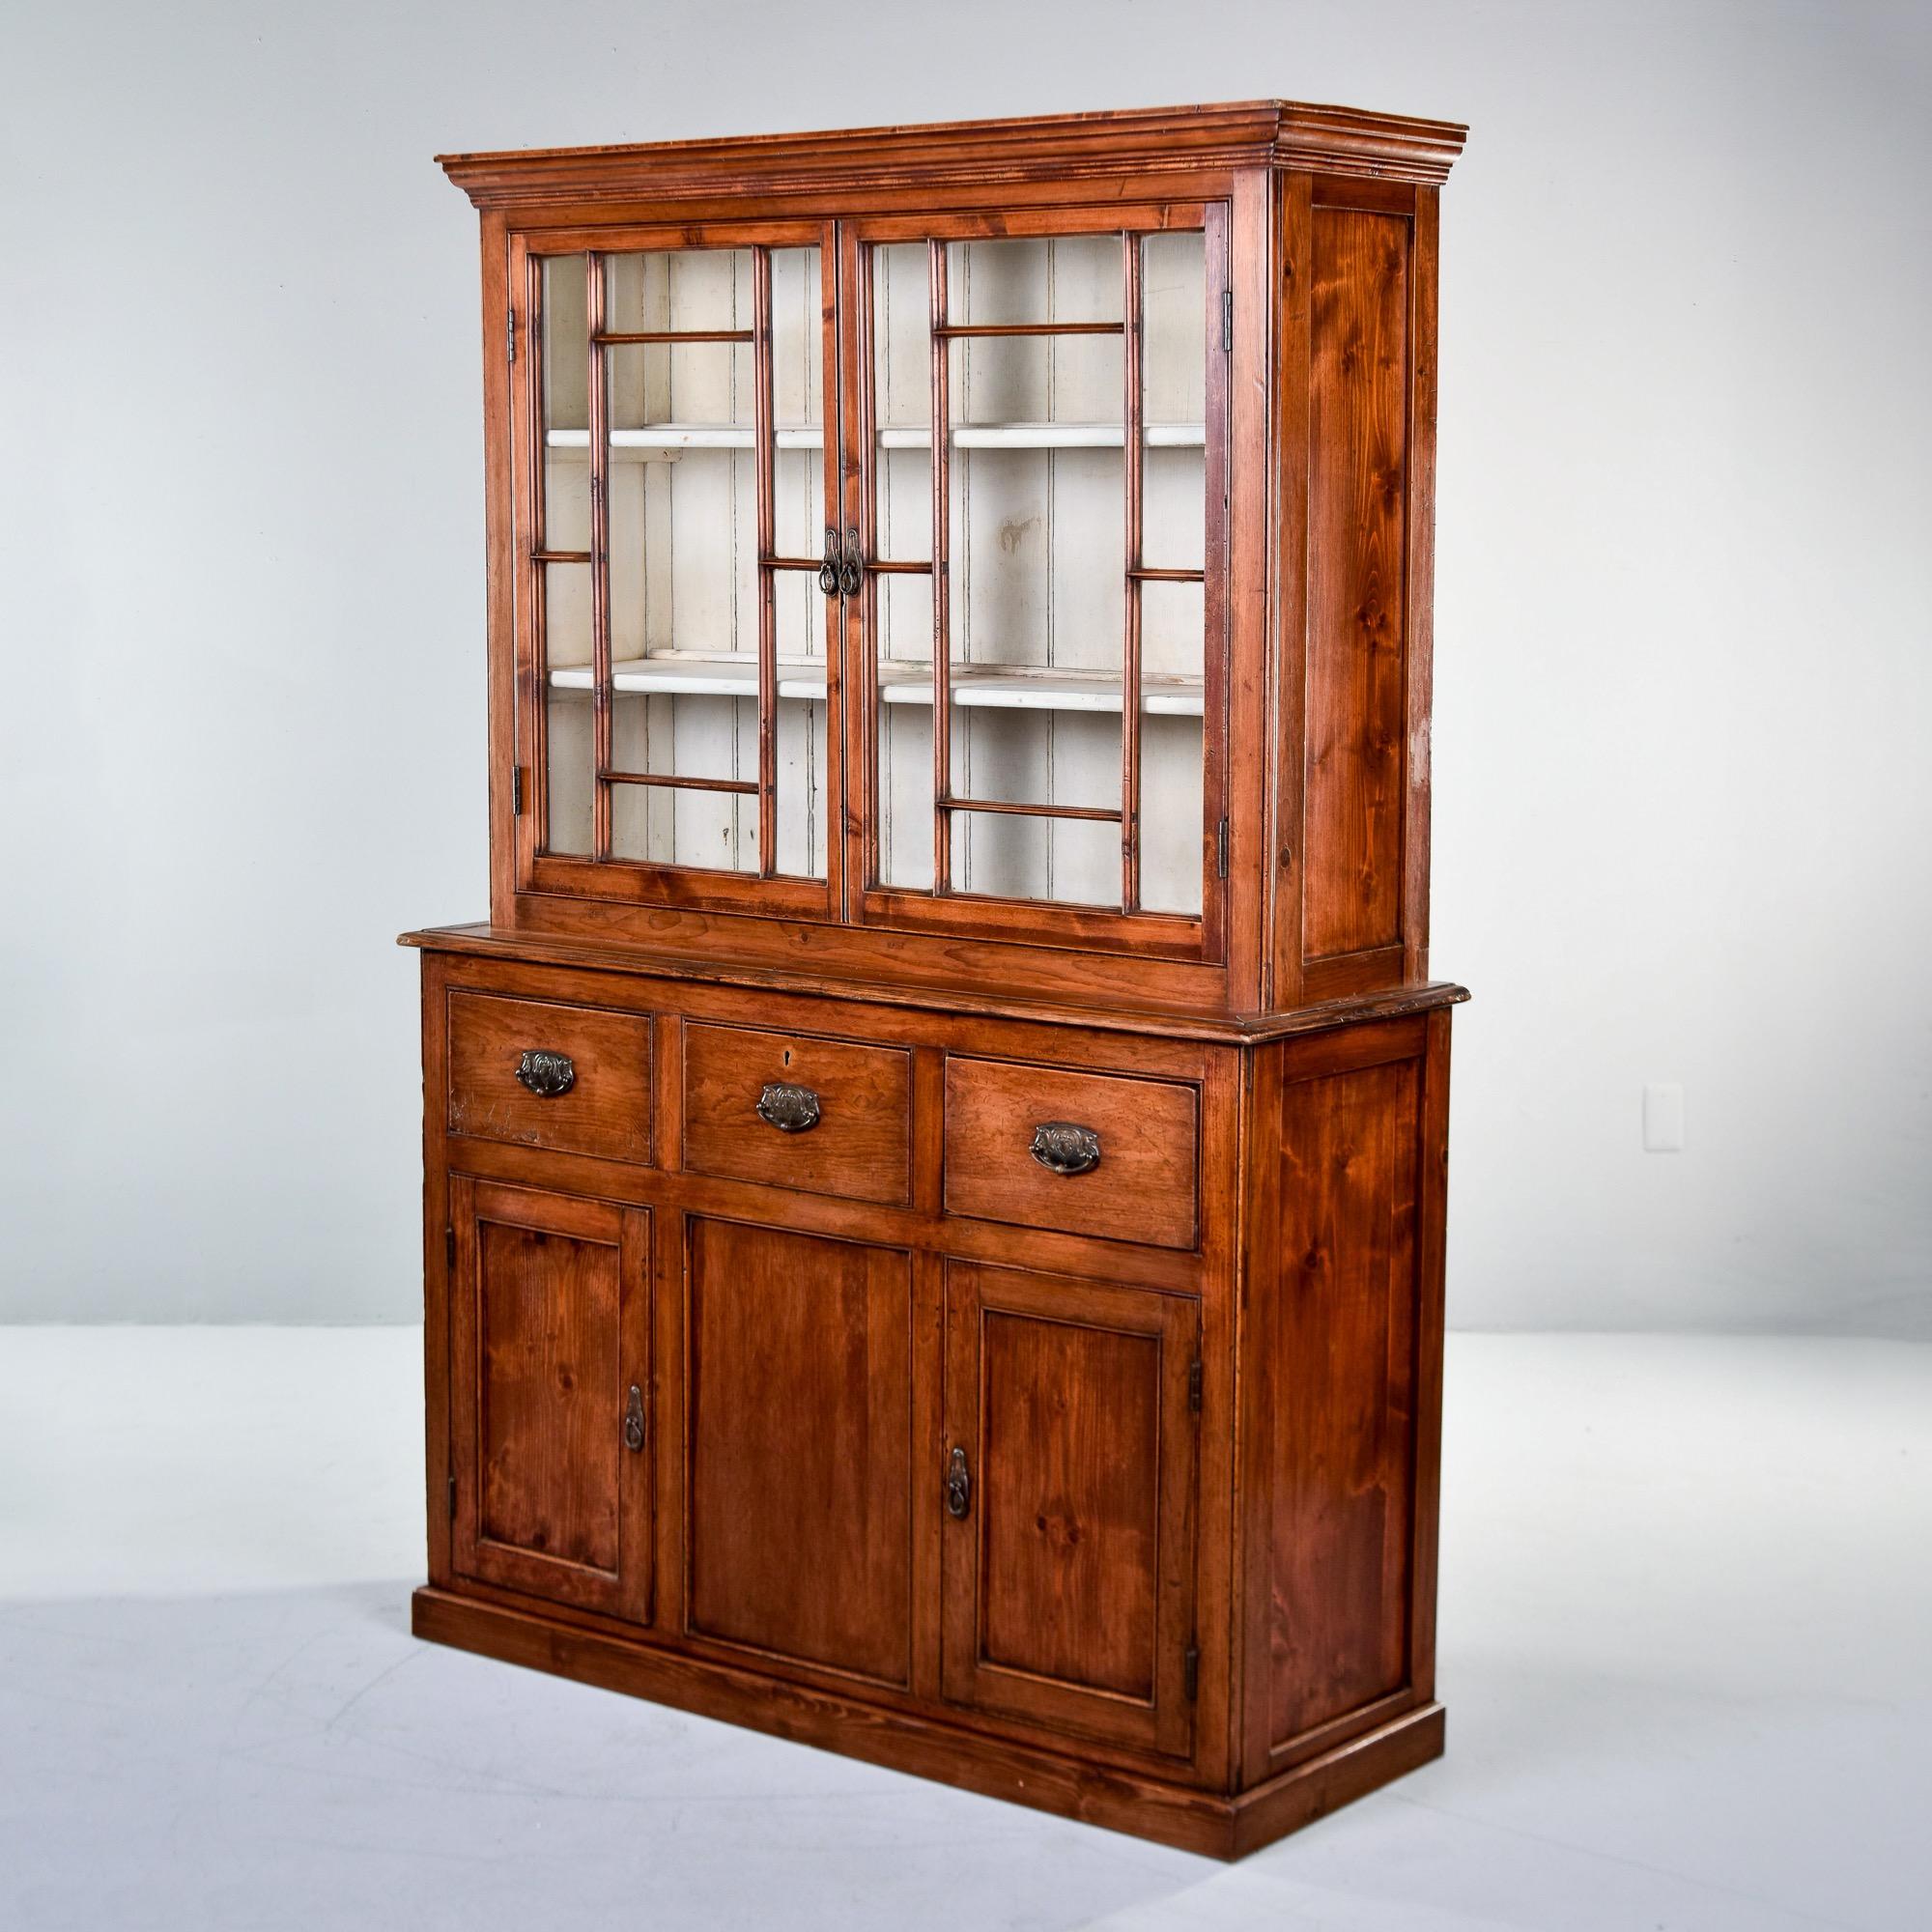 Found in England, this pine cupboard dates from the 1860s. Base has three functional drawers with original hardware over two hinged doors at the bottom that open to storage with a single interior shelf. Top has glass fronted doors that open to white